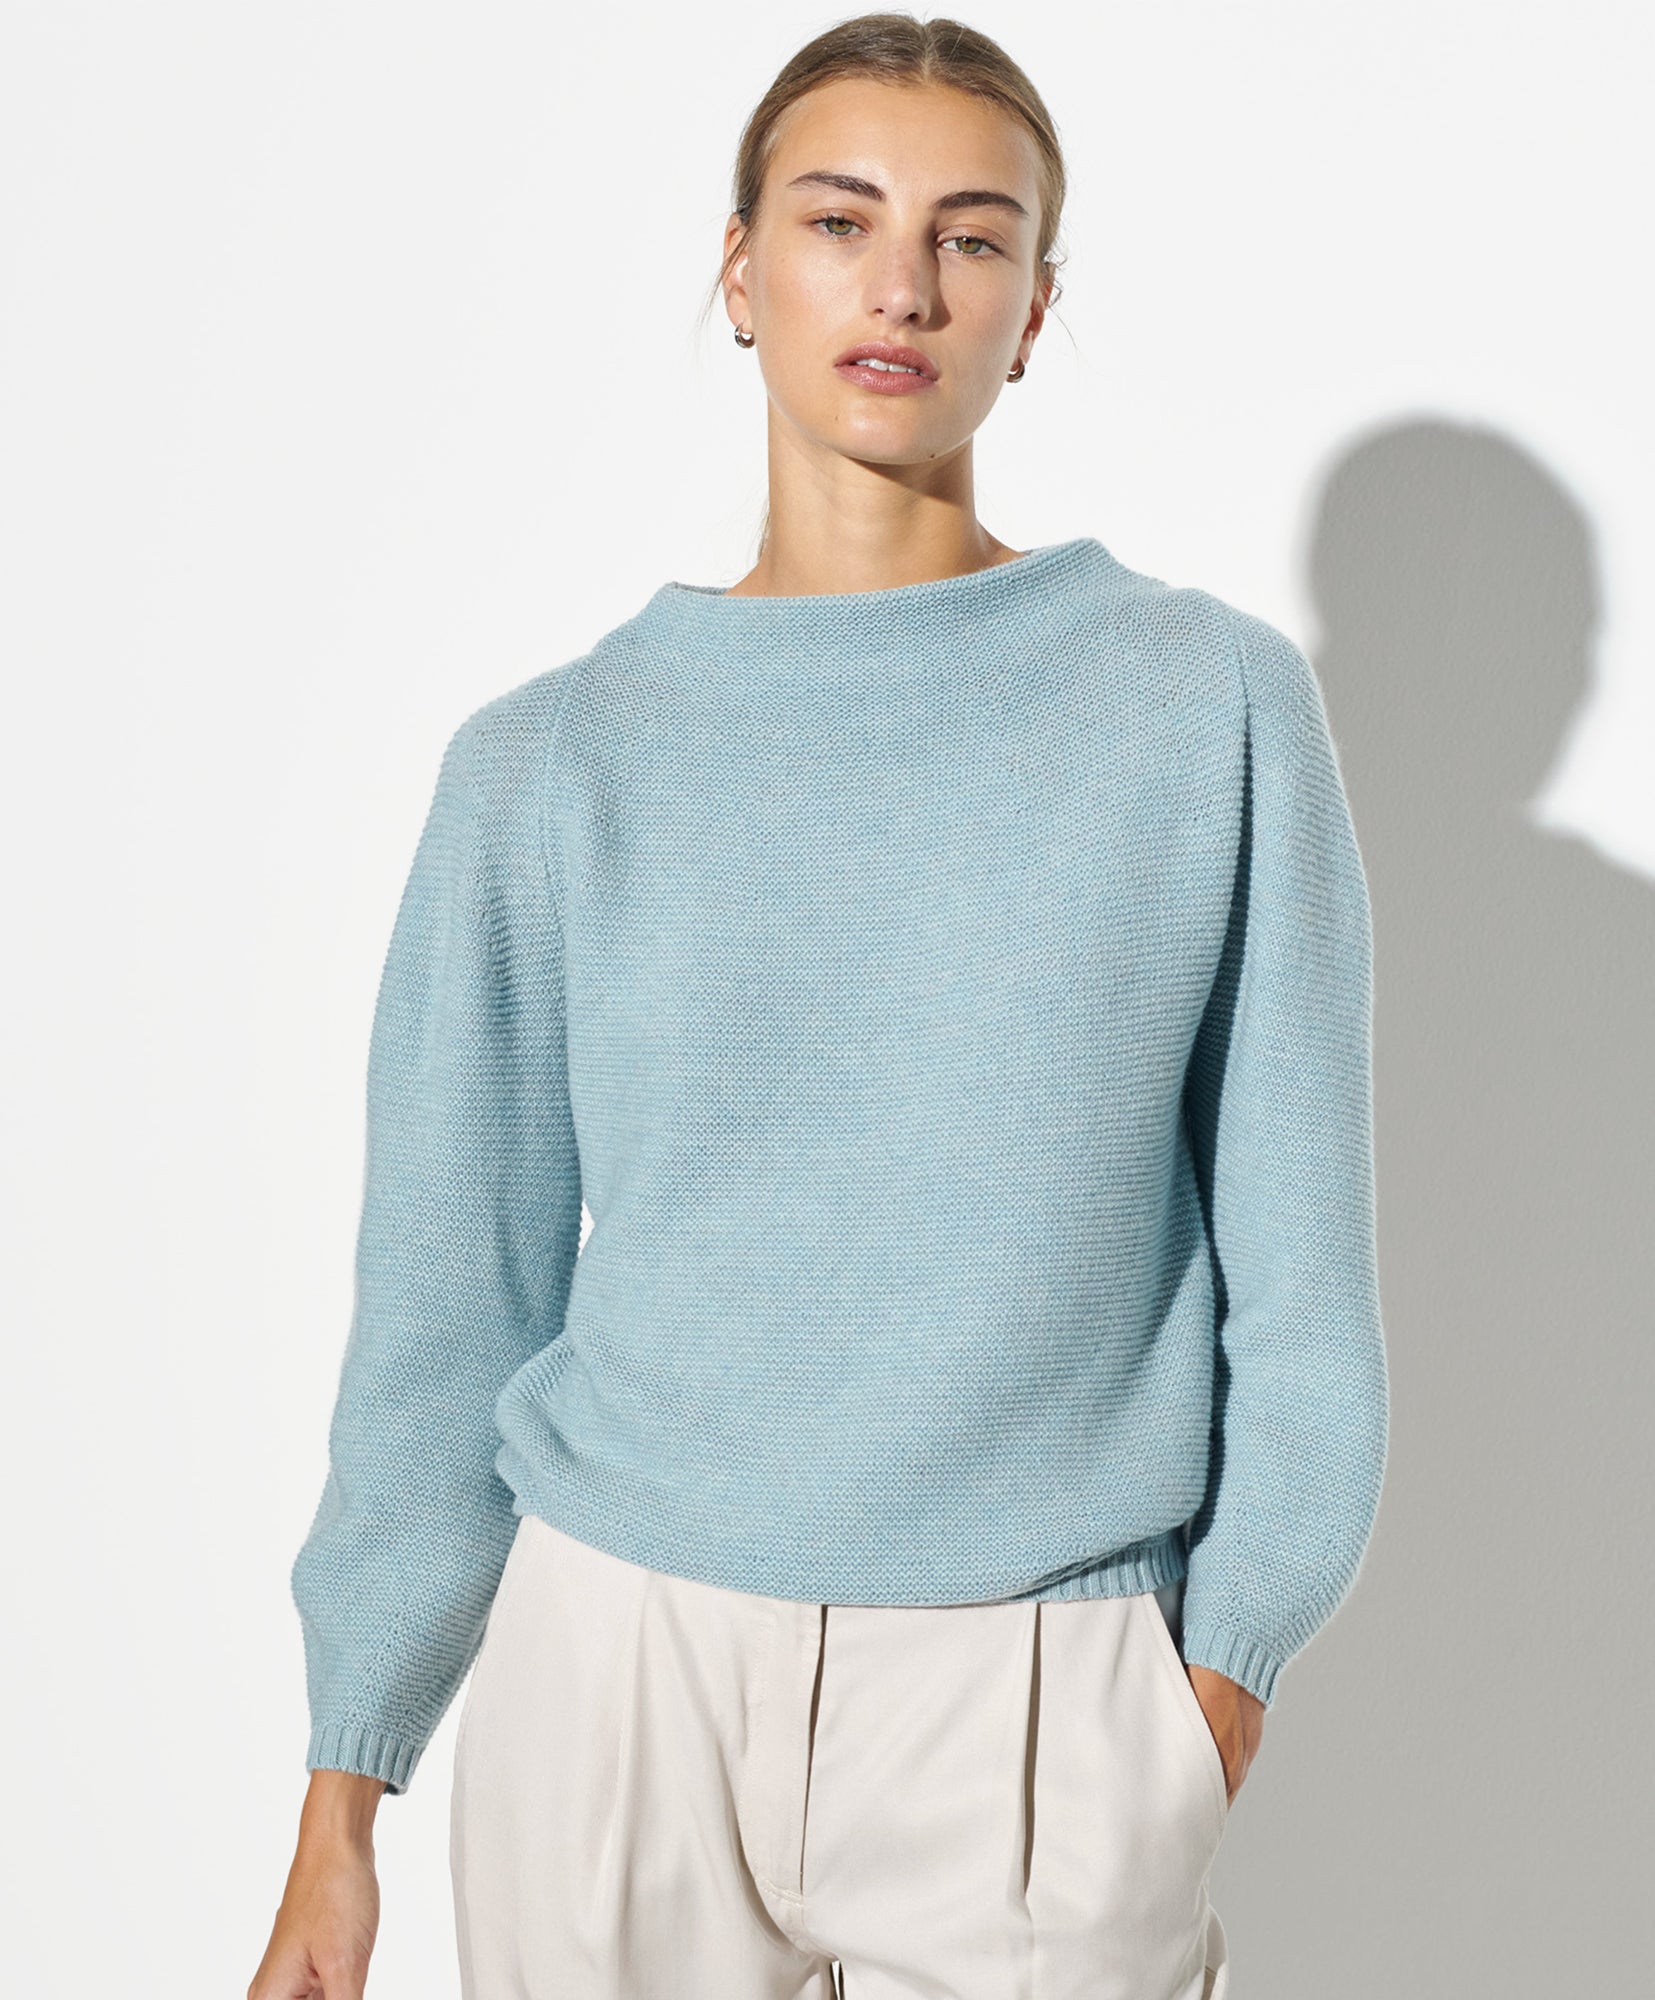 Shop Women's Clothing Online | Sweaters, Tops, & Bottoms – The Reset